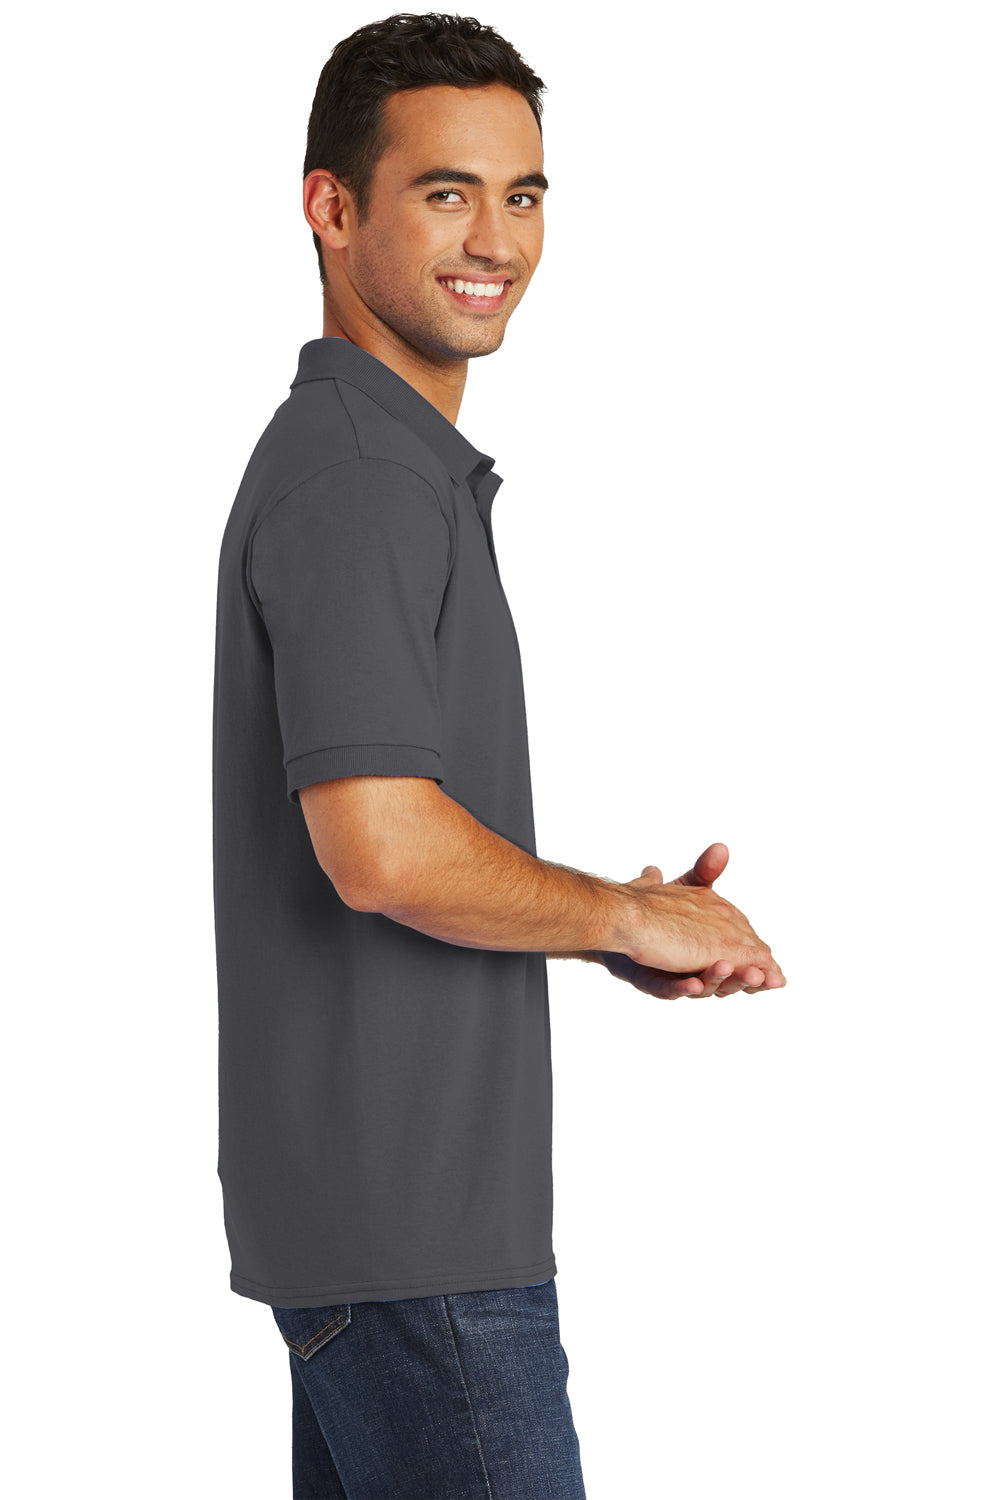 Port & Company KP55 Mens Core Stain Resistant Short Sleeve Polo Shirt Charcoal Grey Side